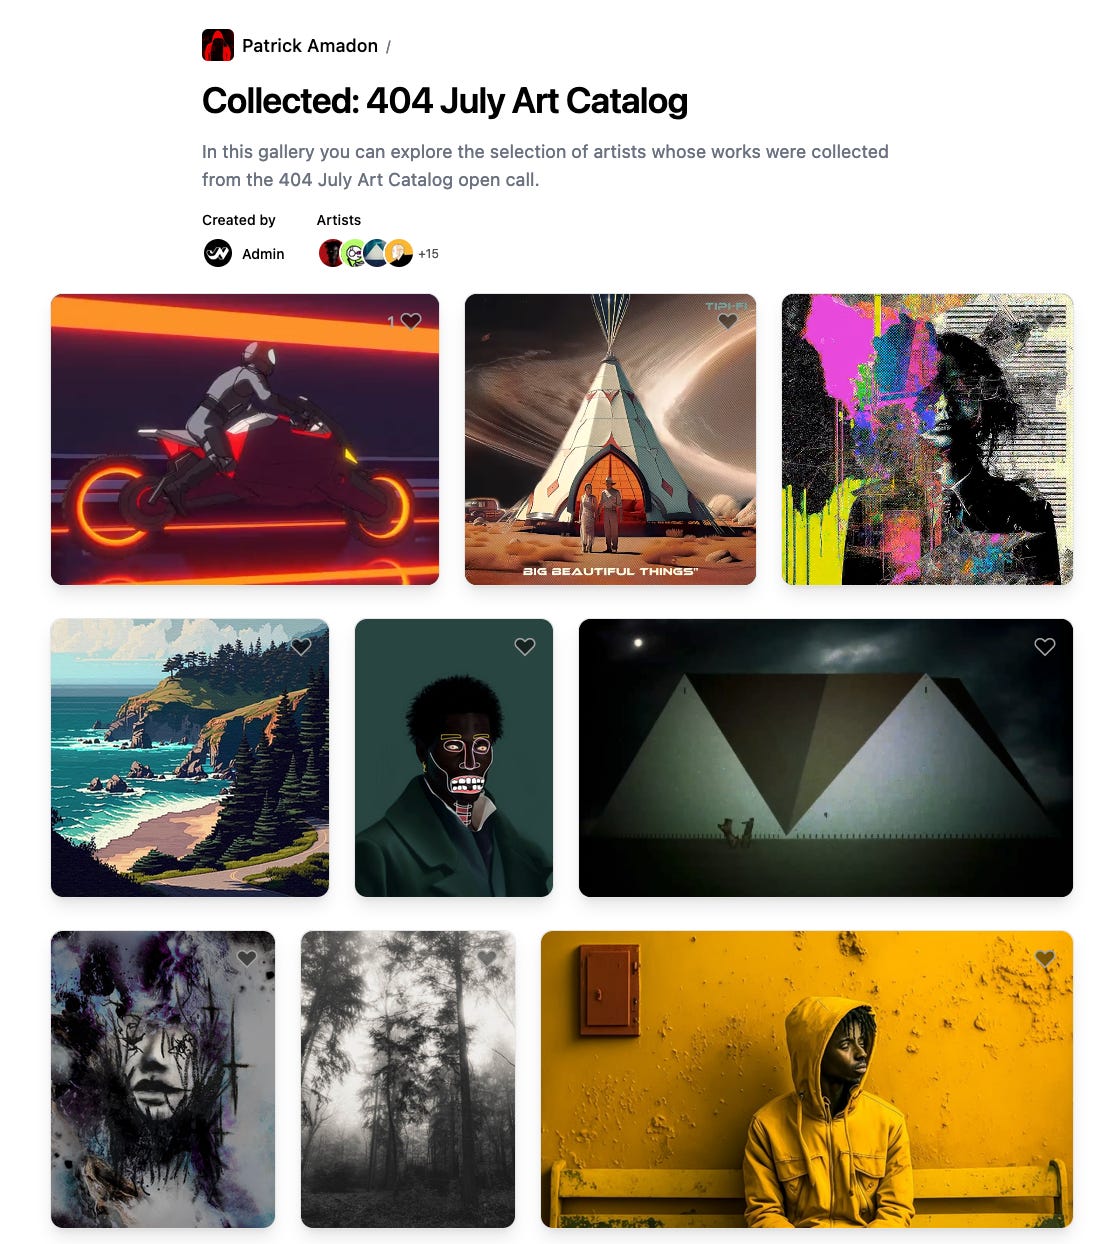 Patrick Amadon’s Art Catalog runs every month and is a great way to discover, collect and celebrate digital art.